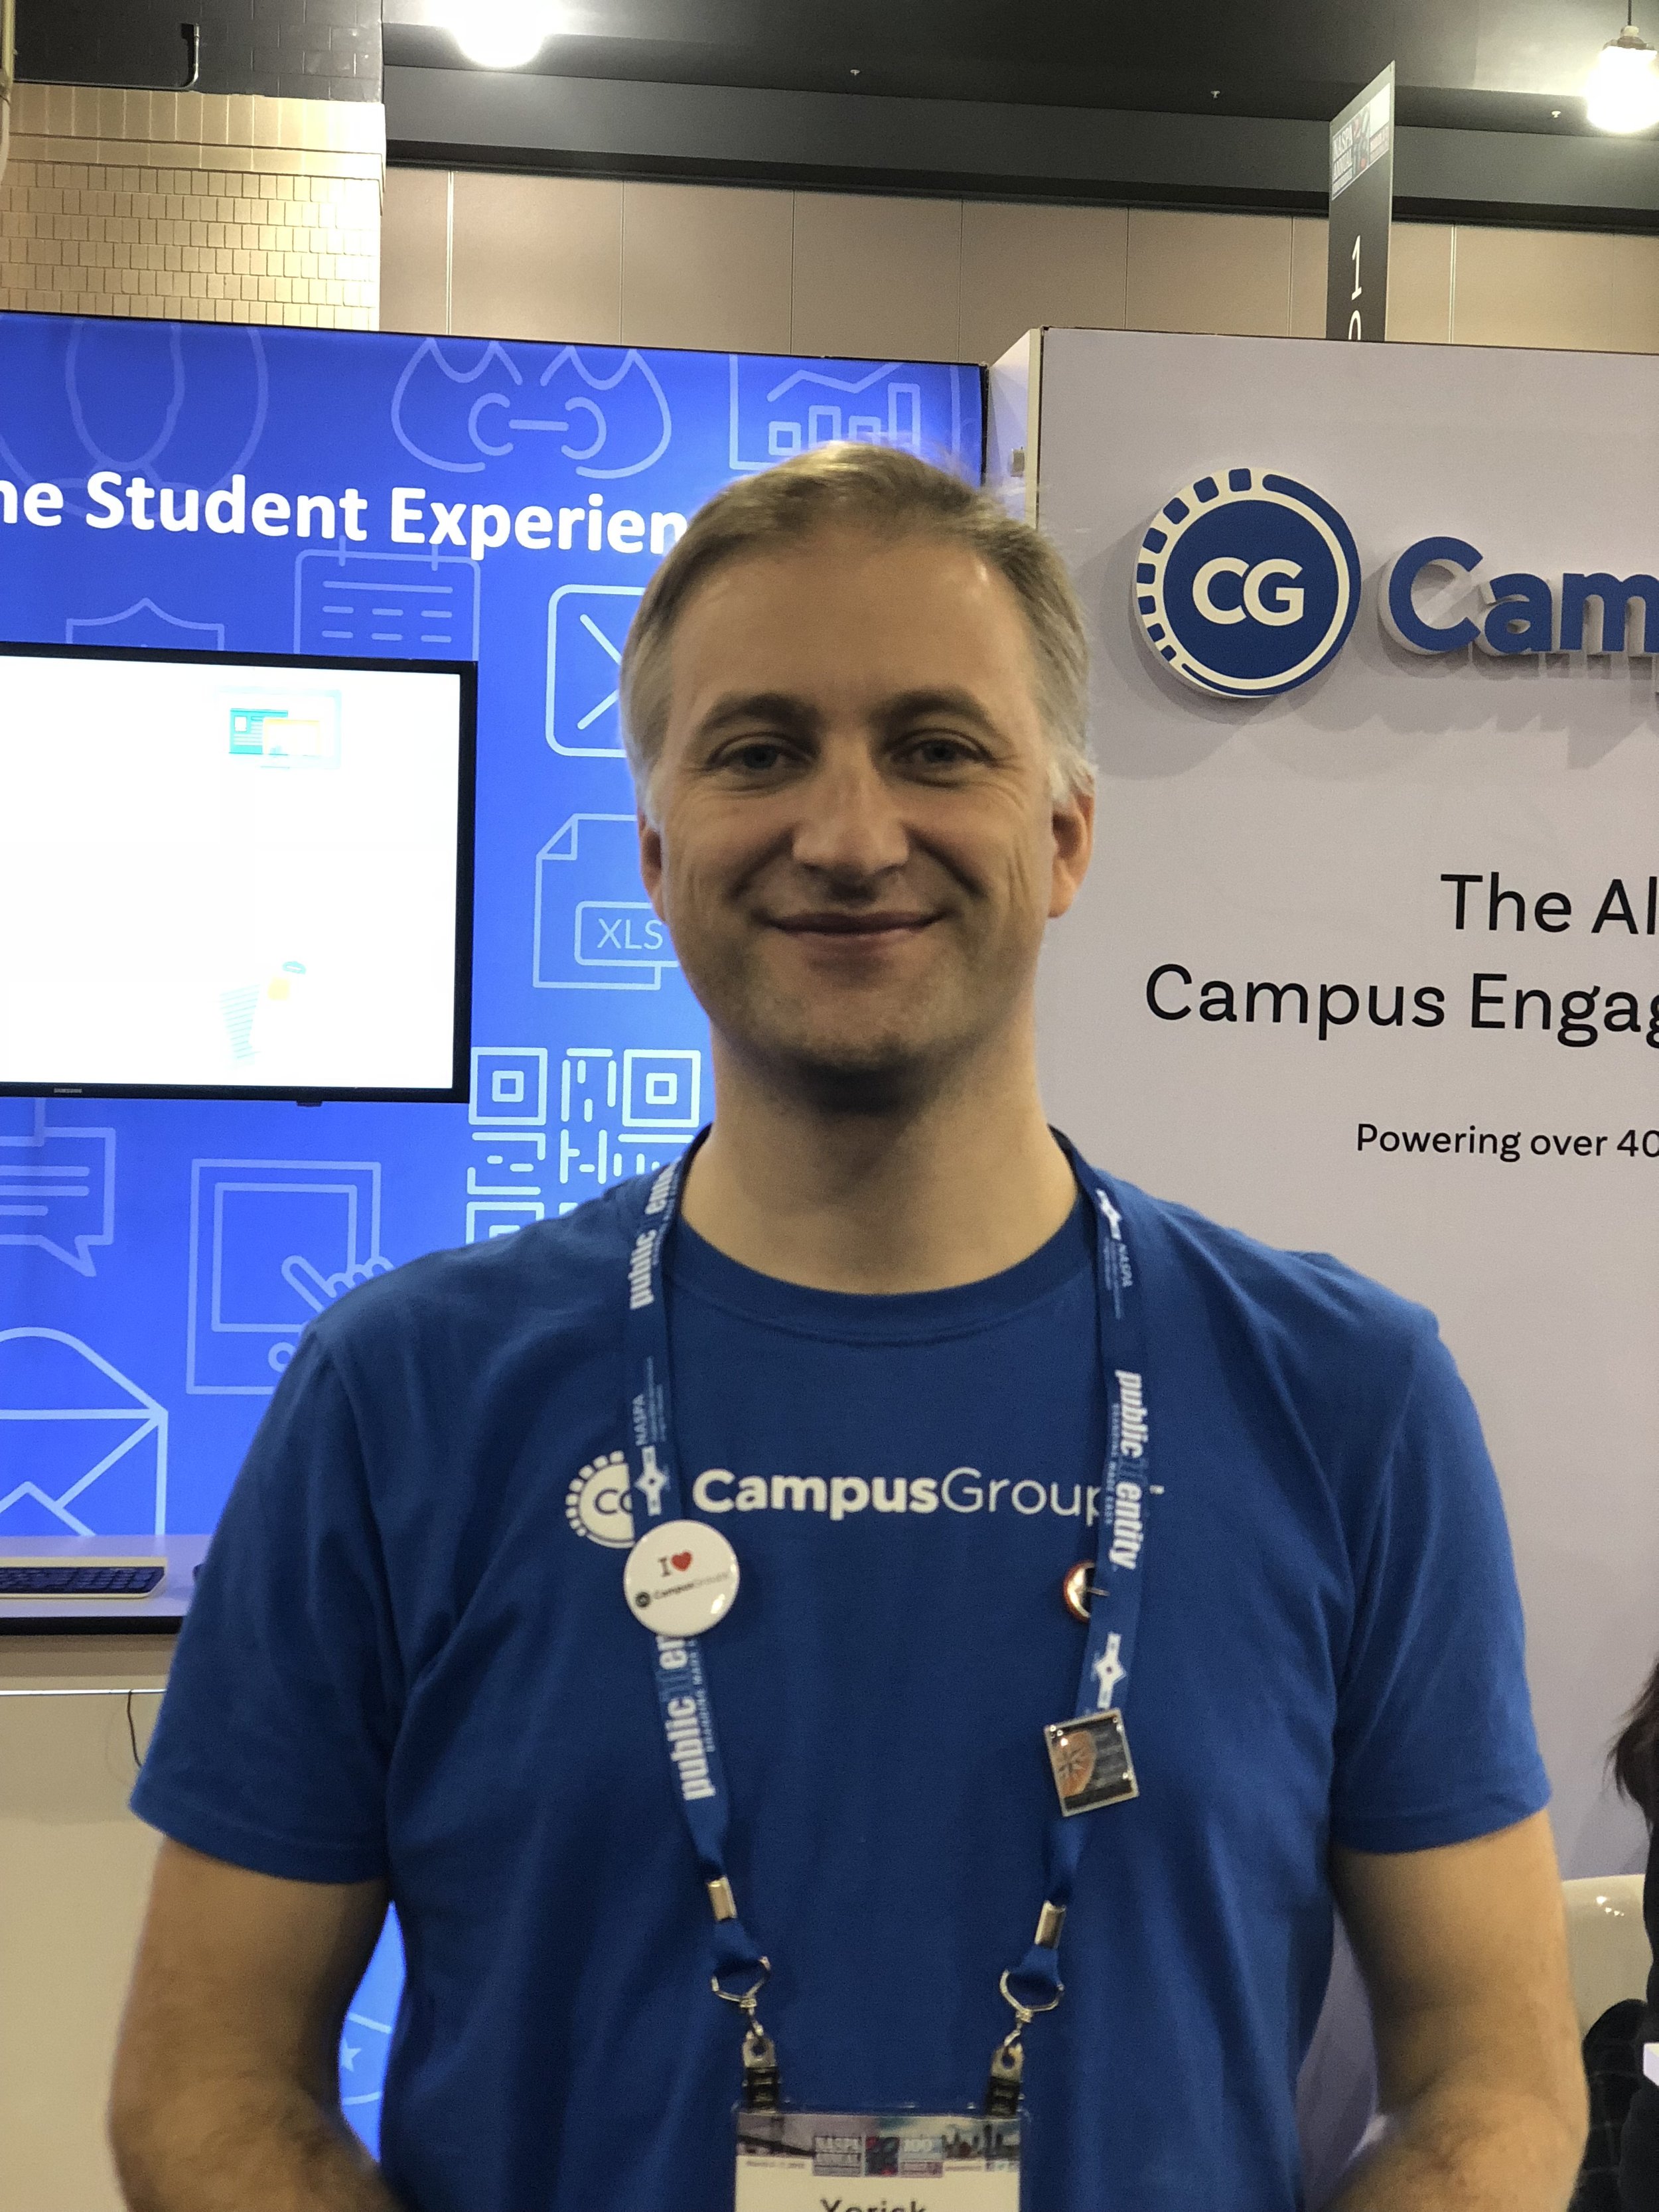  CampusGroups Founder and CEO, Yorick Ser, spoke with dozens of Student Affairs leaders about the challenges facing campuses today,&nbsp;and how to solve them together. 